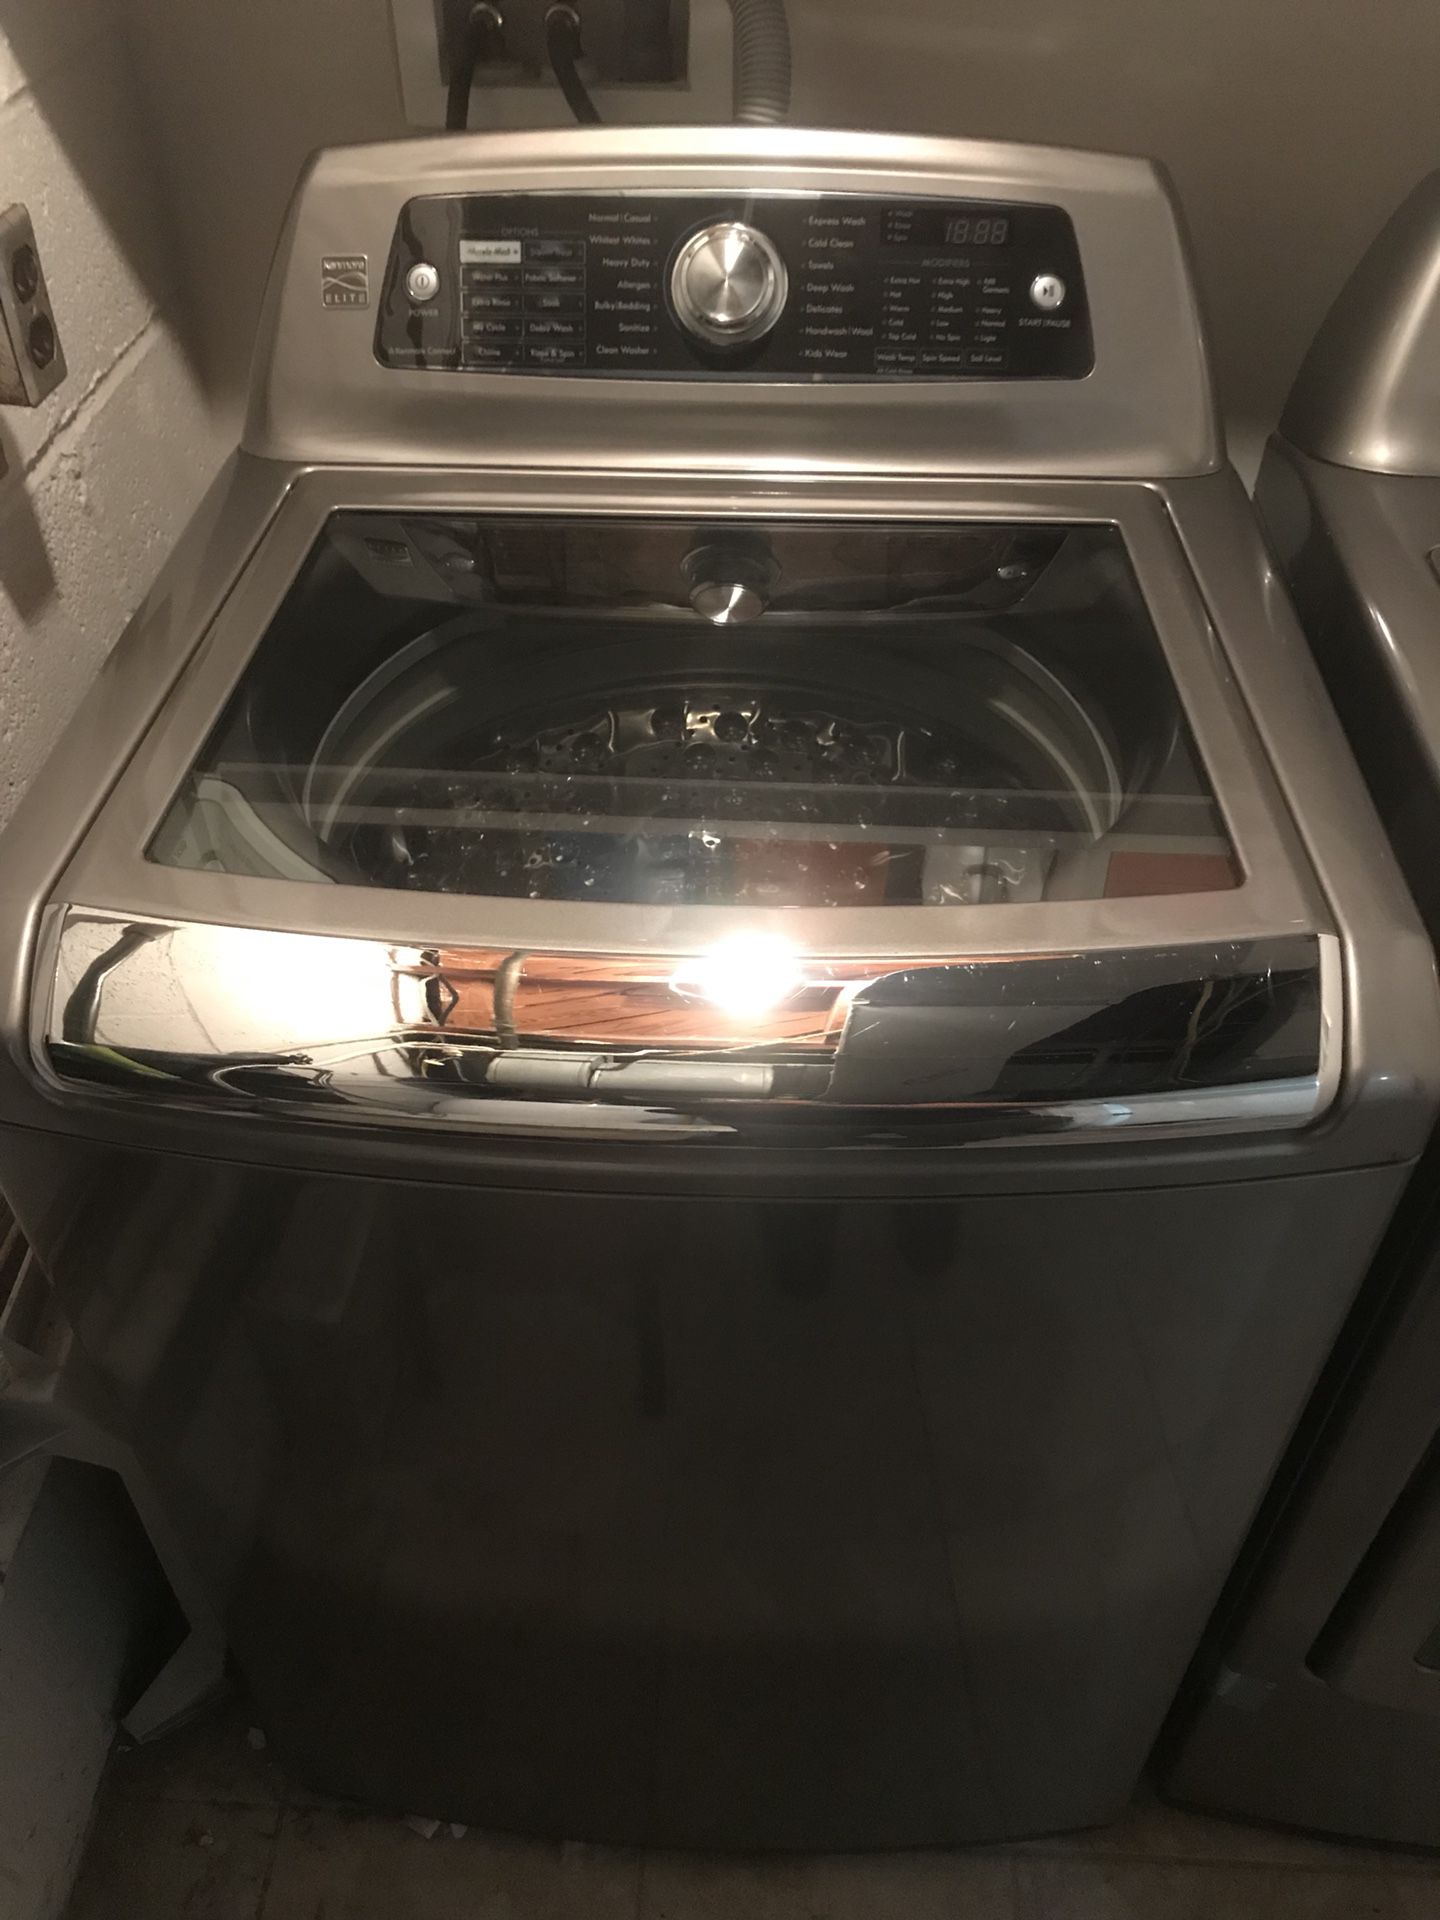 Kenmore Elite Washer and Dryer 796 model